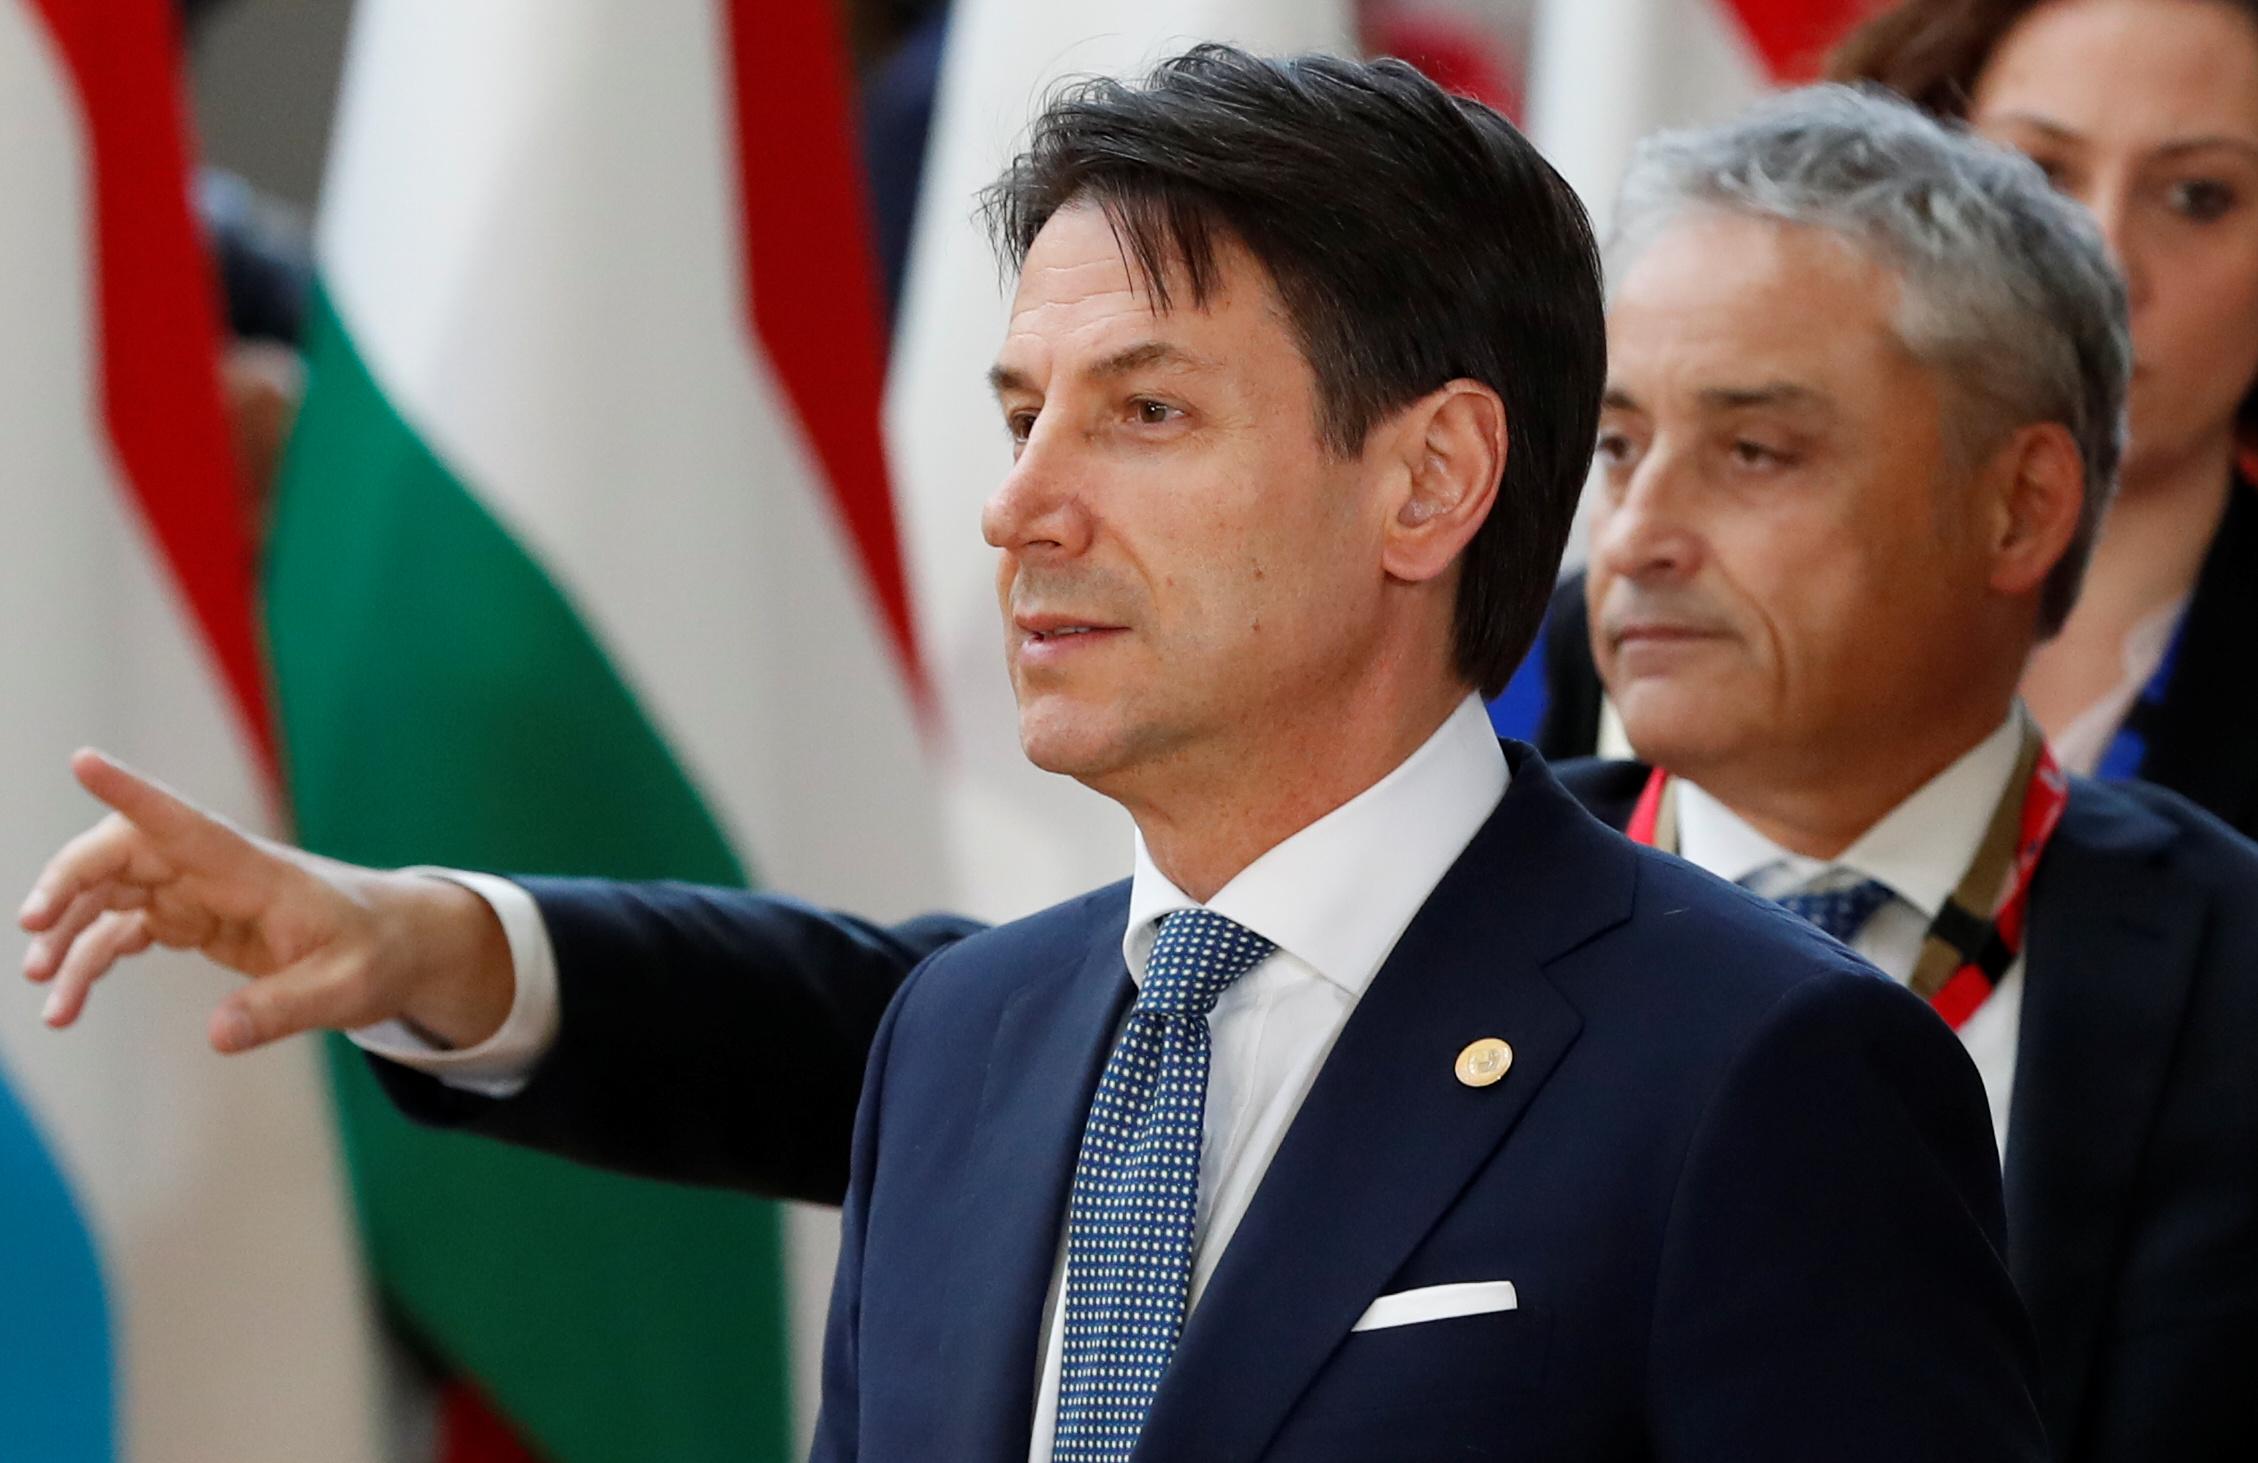 Italian prime minister Giuseppe Conte arrives at the European Council summit in Brussels